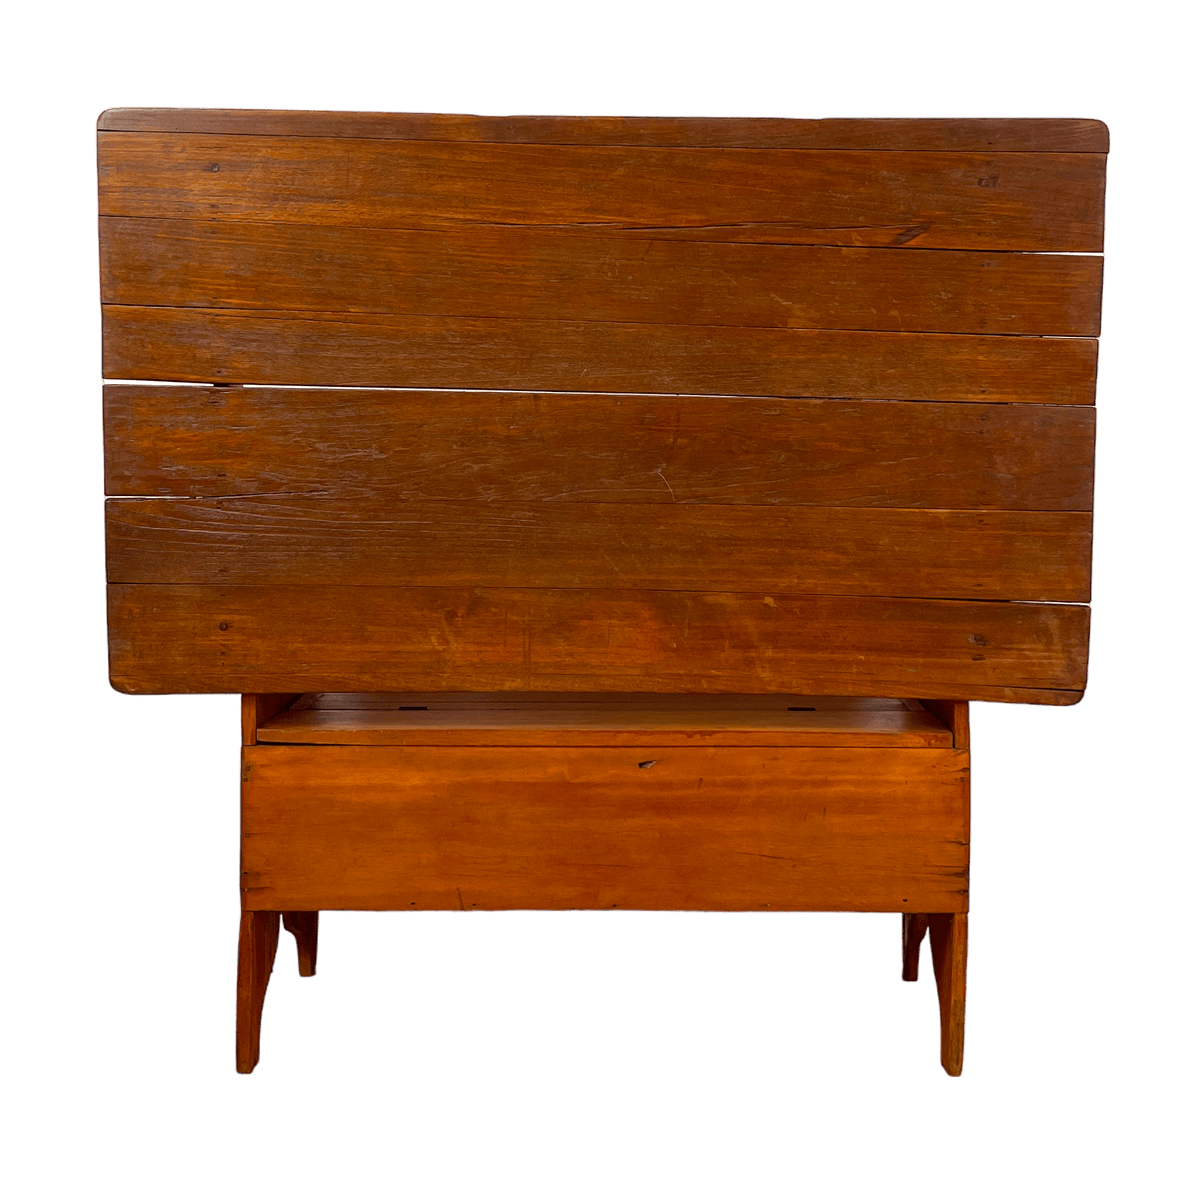 Early American Pin Top Hutch Table